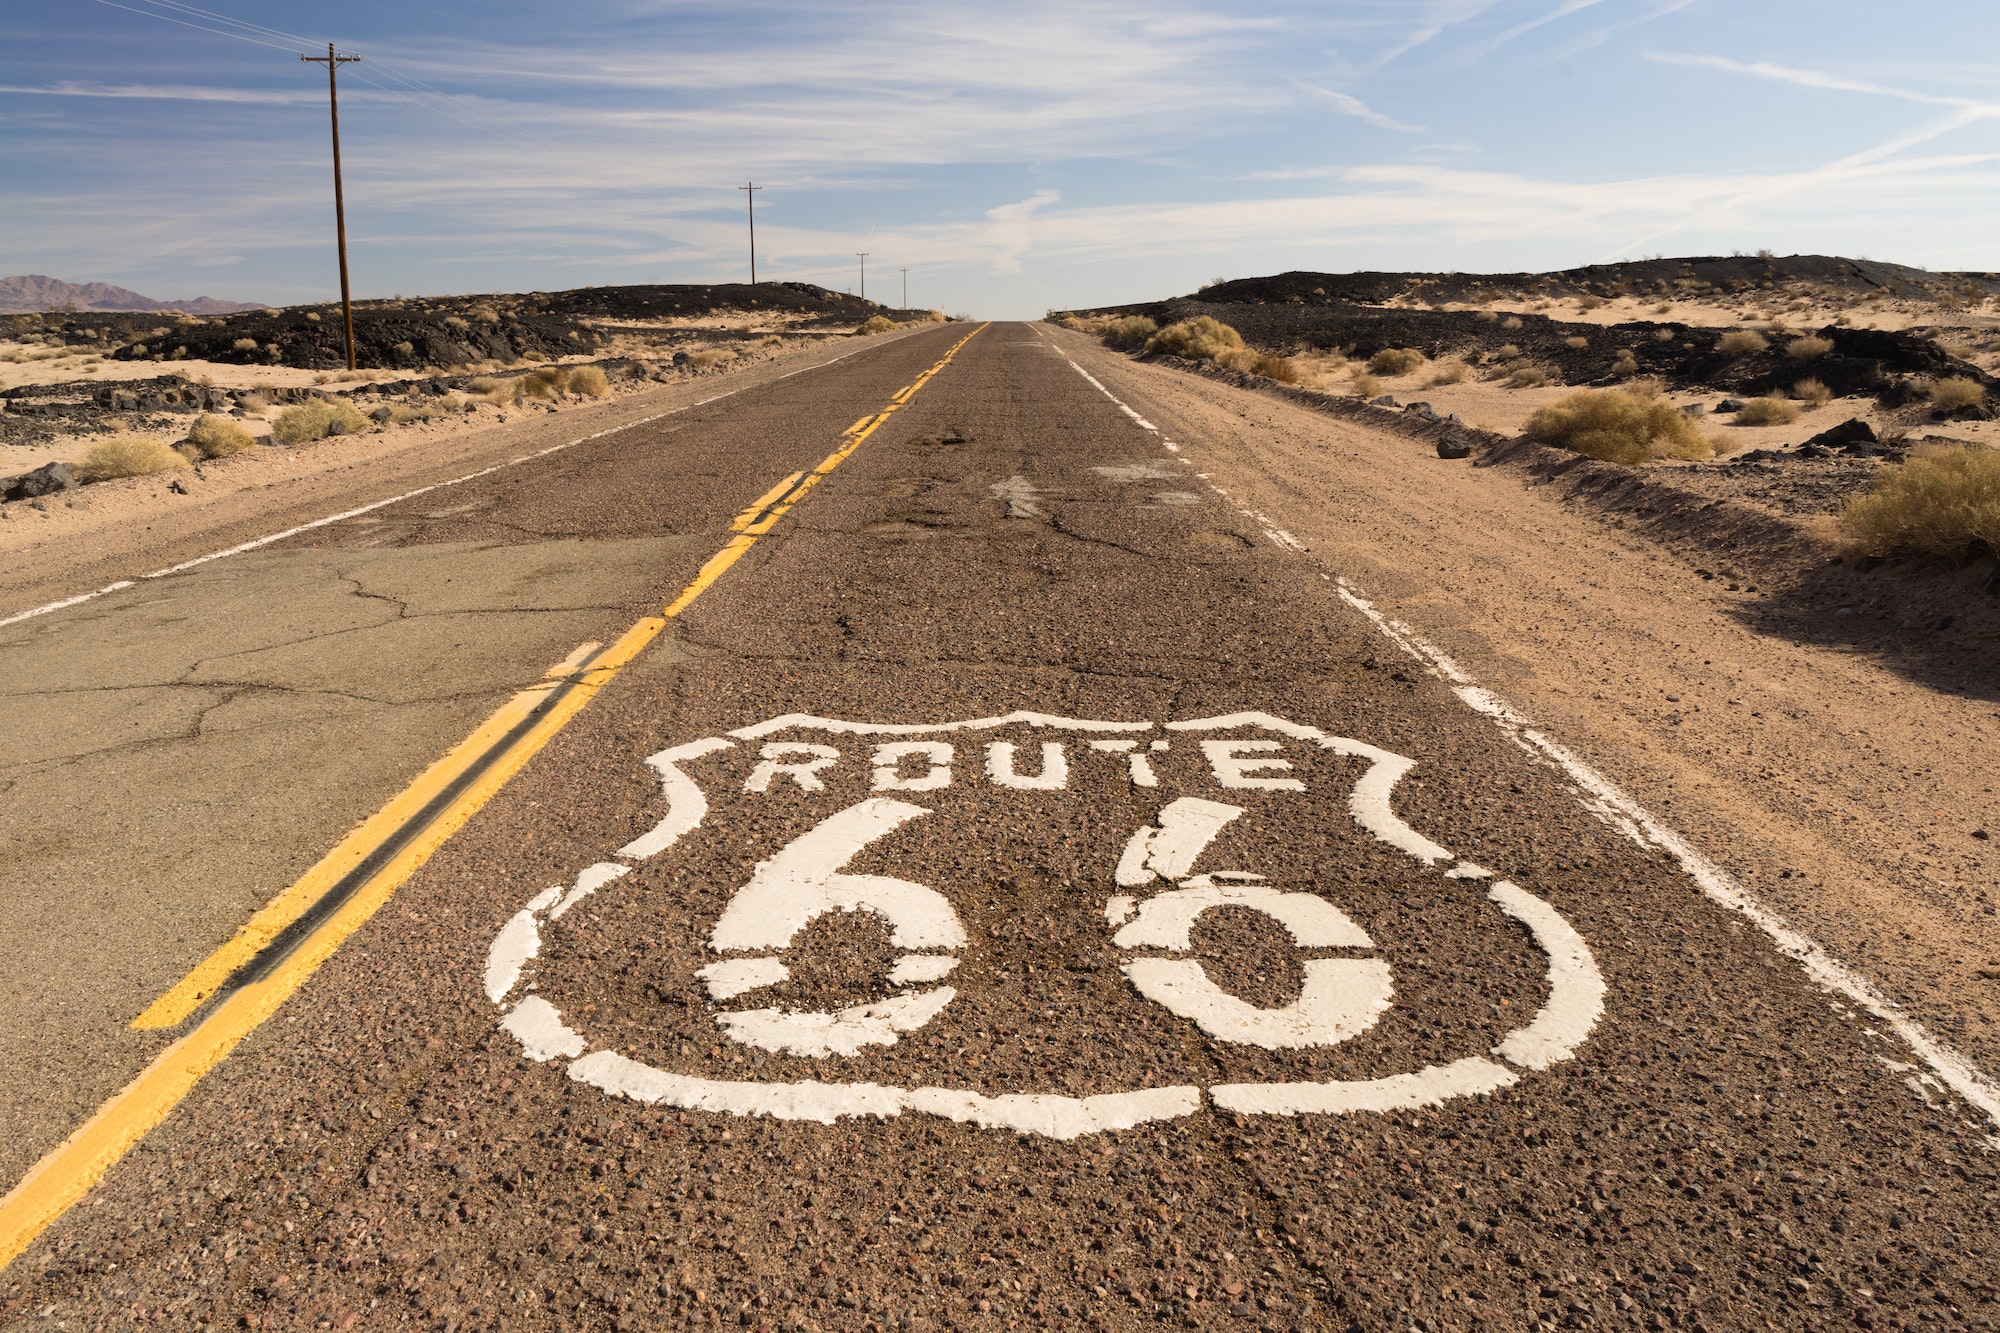 The famous route 66, an incredible journey